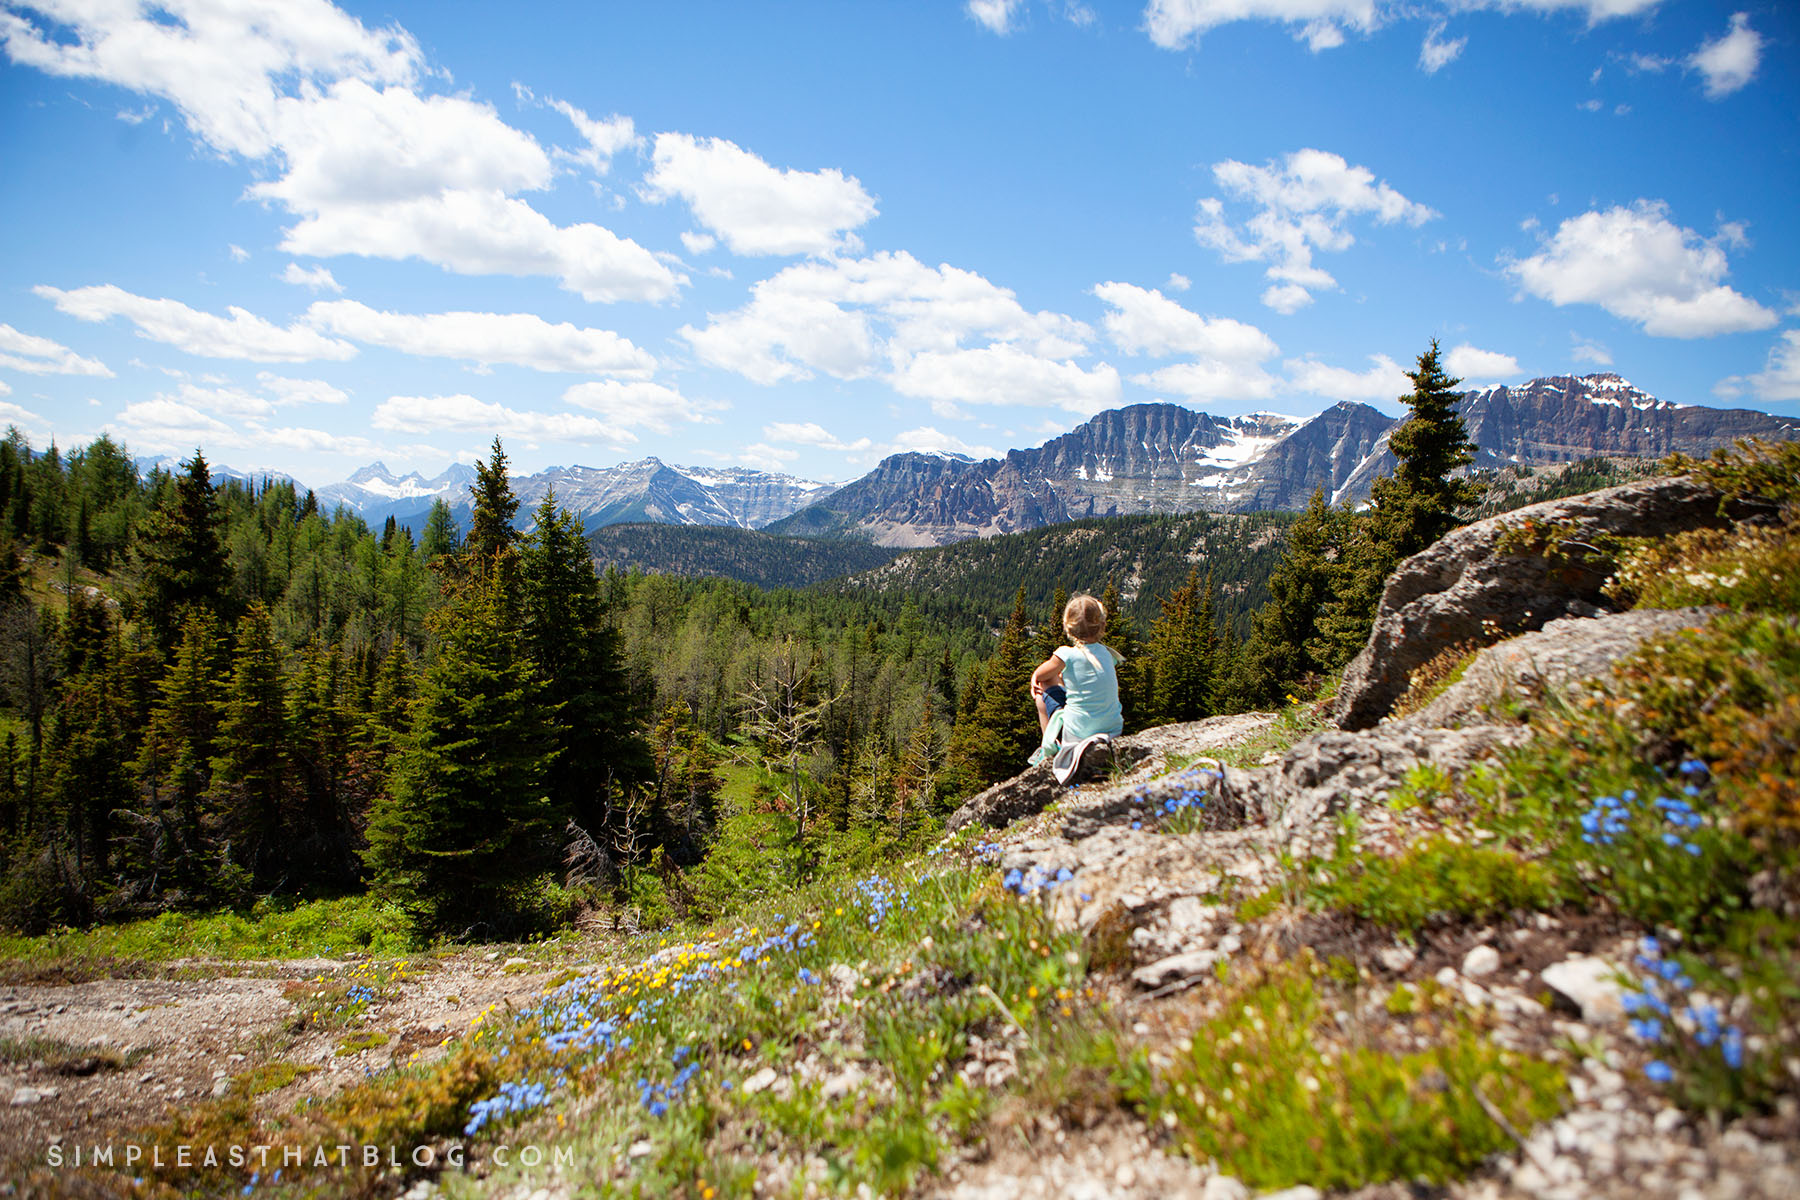 Beautiful hikes to explore as a family in Banff any time of year - winter, spring, summer or fall.